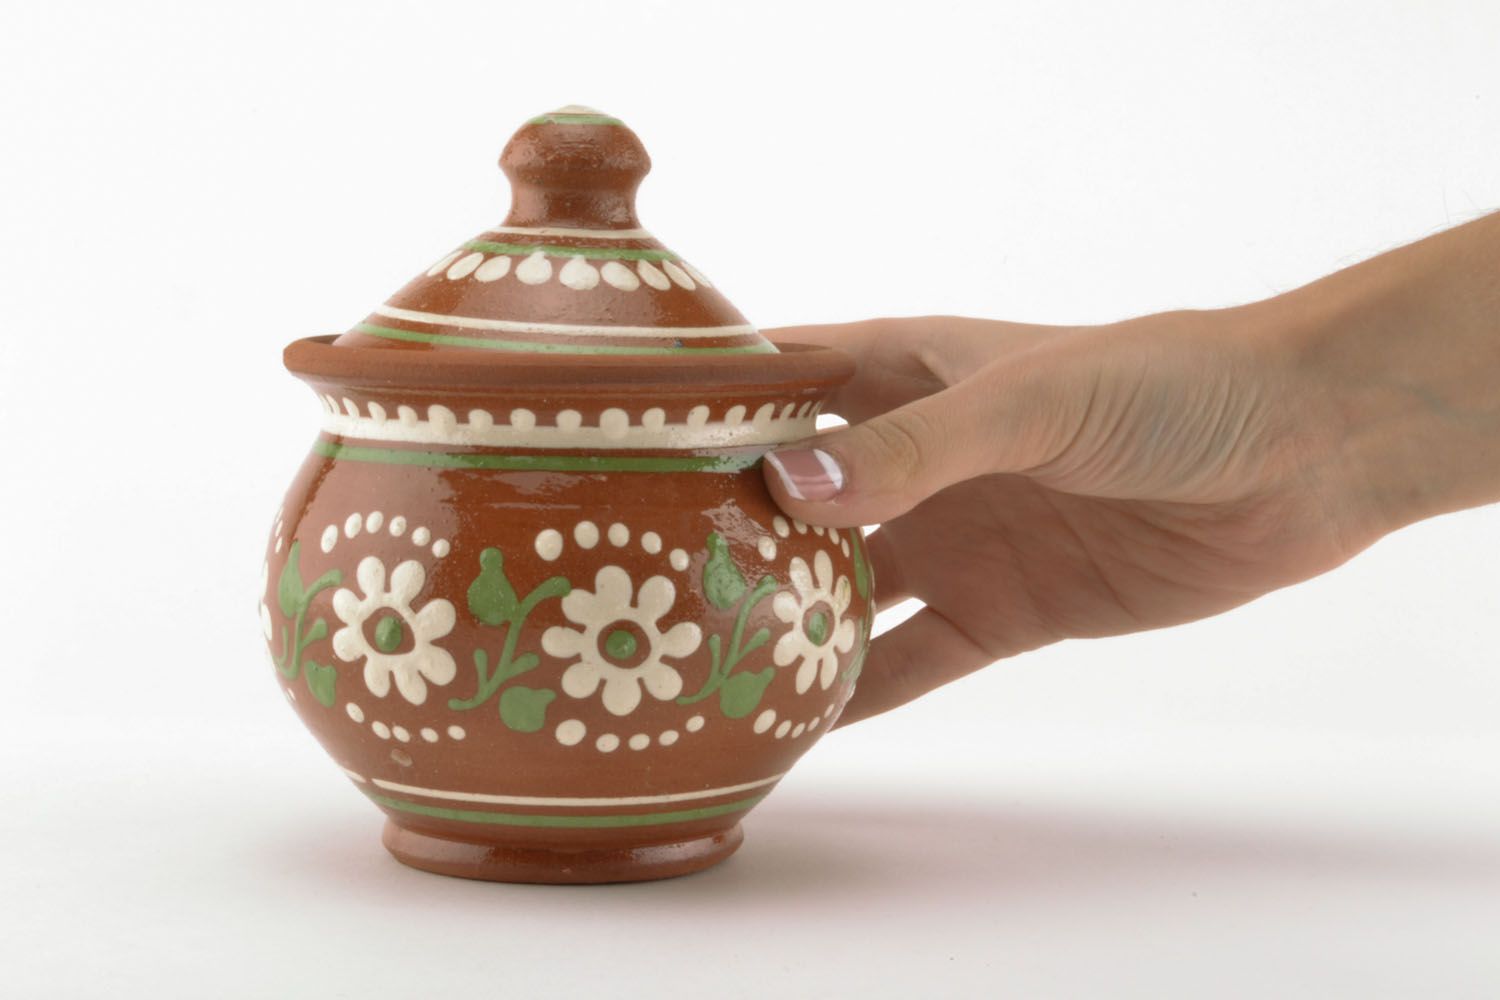 3,5 inches tall cooking ceramic pot with a lid in ethnic style and floral pattern 1 lb photo 5